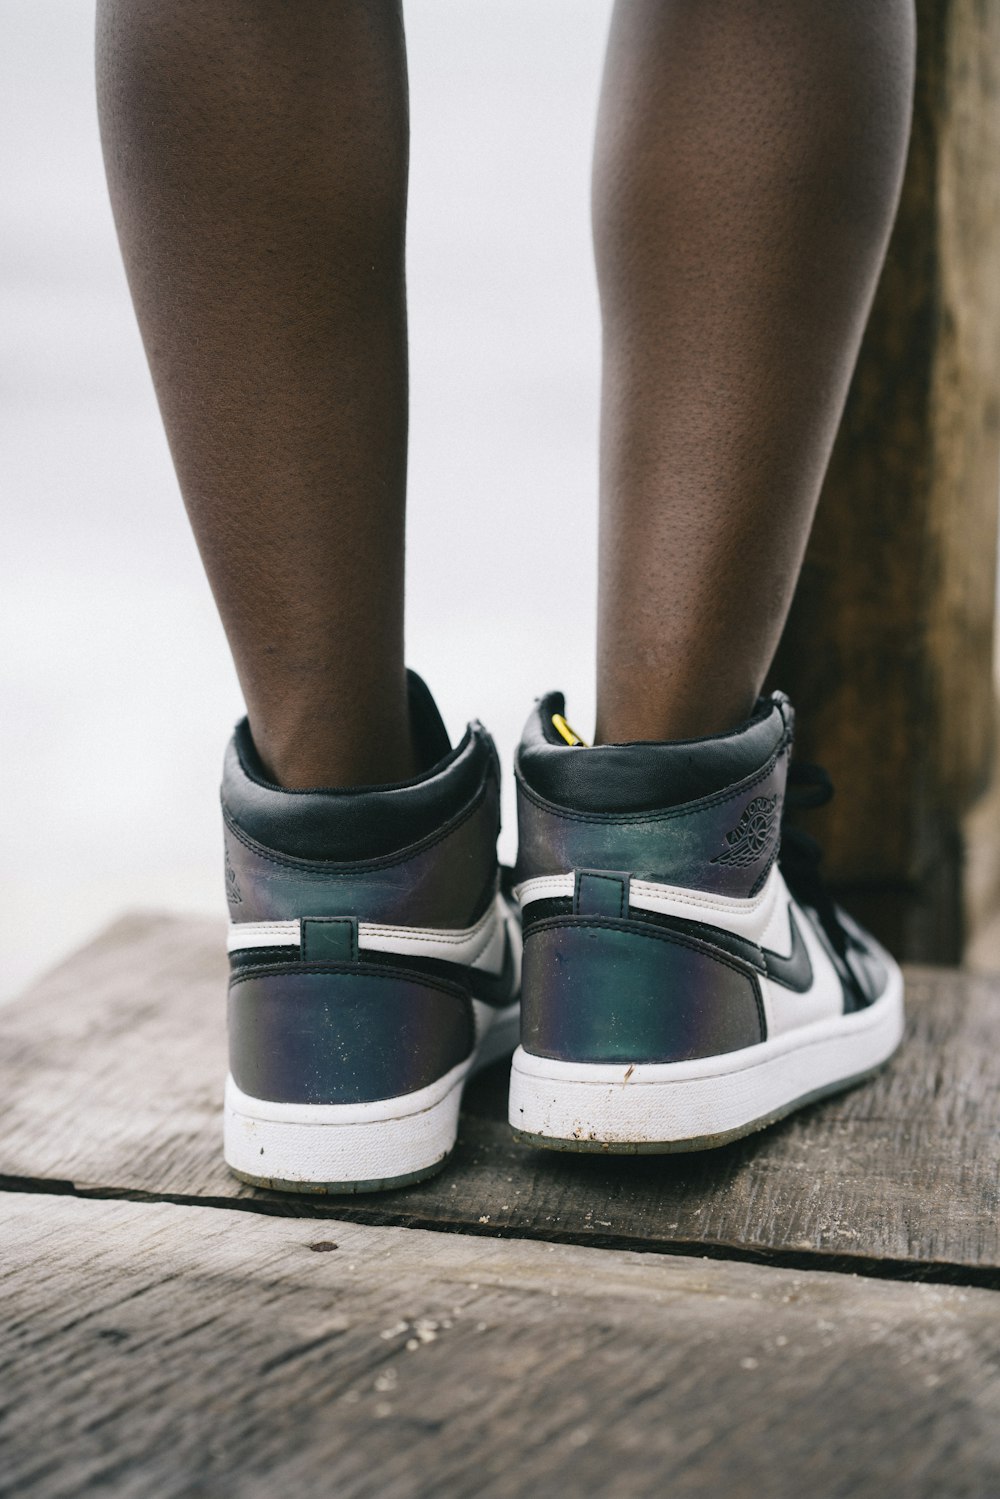 person wearing black and white high top sneakers photo – Free Sierra leone  Image on Unsplash